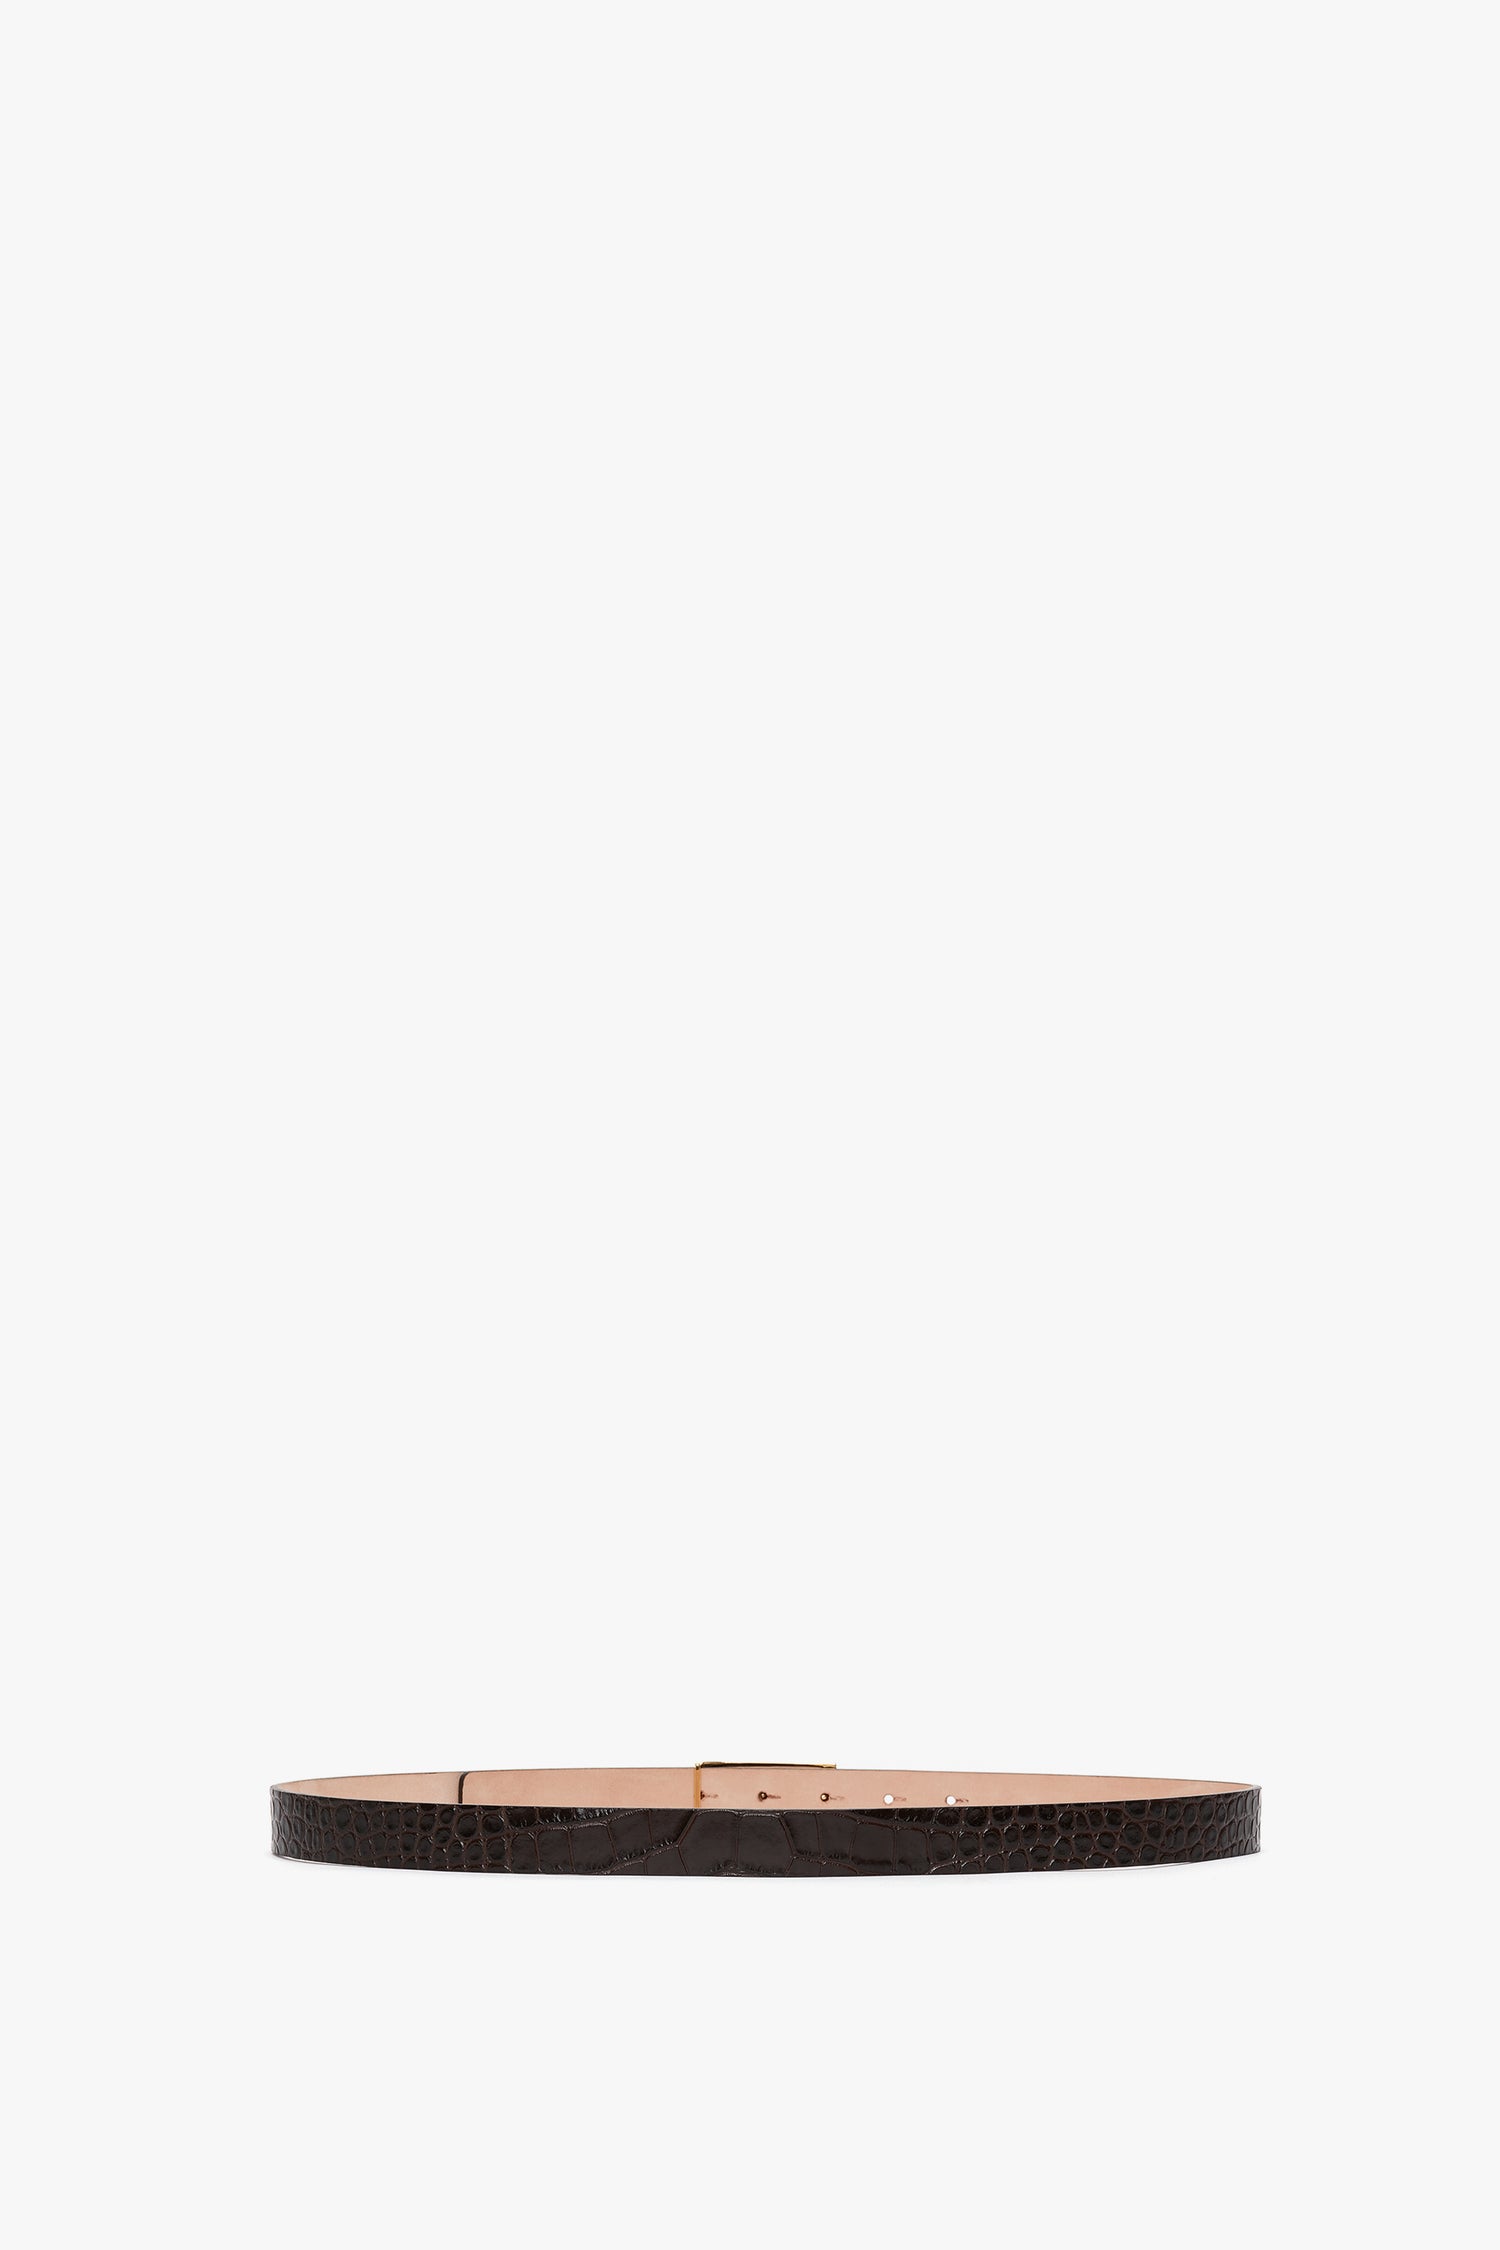 A thin black Frame Belt In Espresso Croc Embossed Calf Leather by Victoria Beckham, crafted from croc-embossed calf leather with a textured pattern and adorned with gold hardware in the form of a rectangular buckle, displayed against a white background.